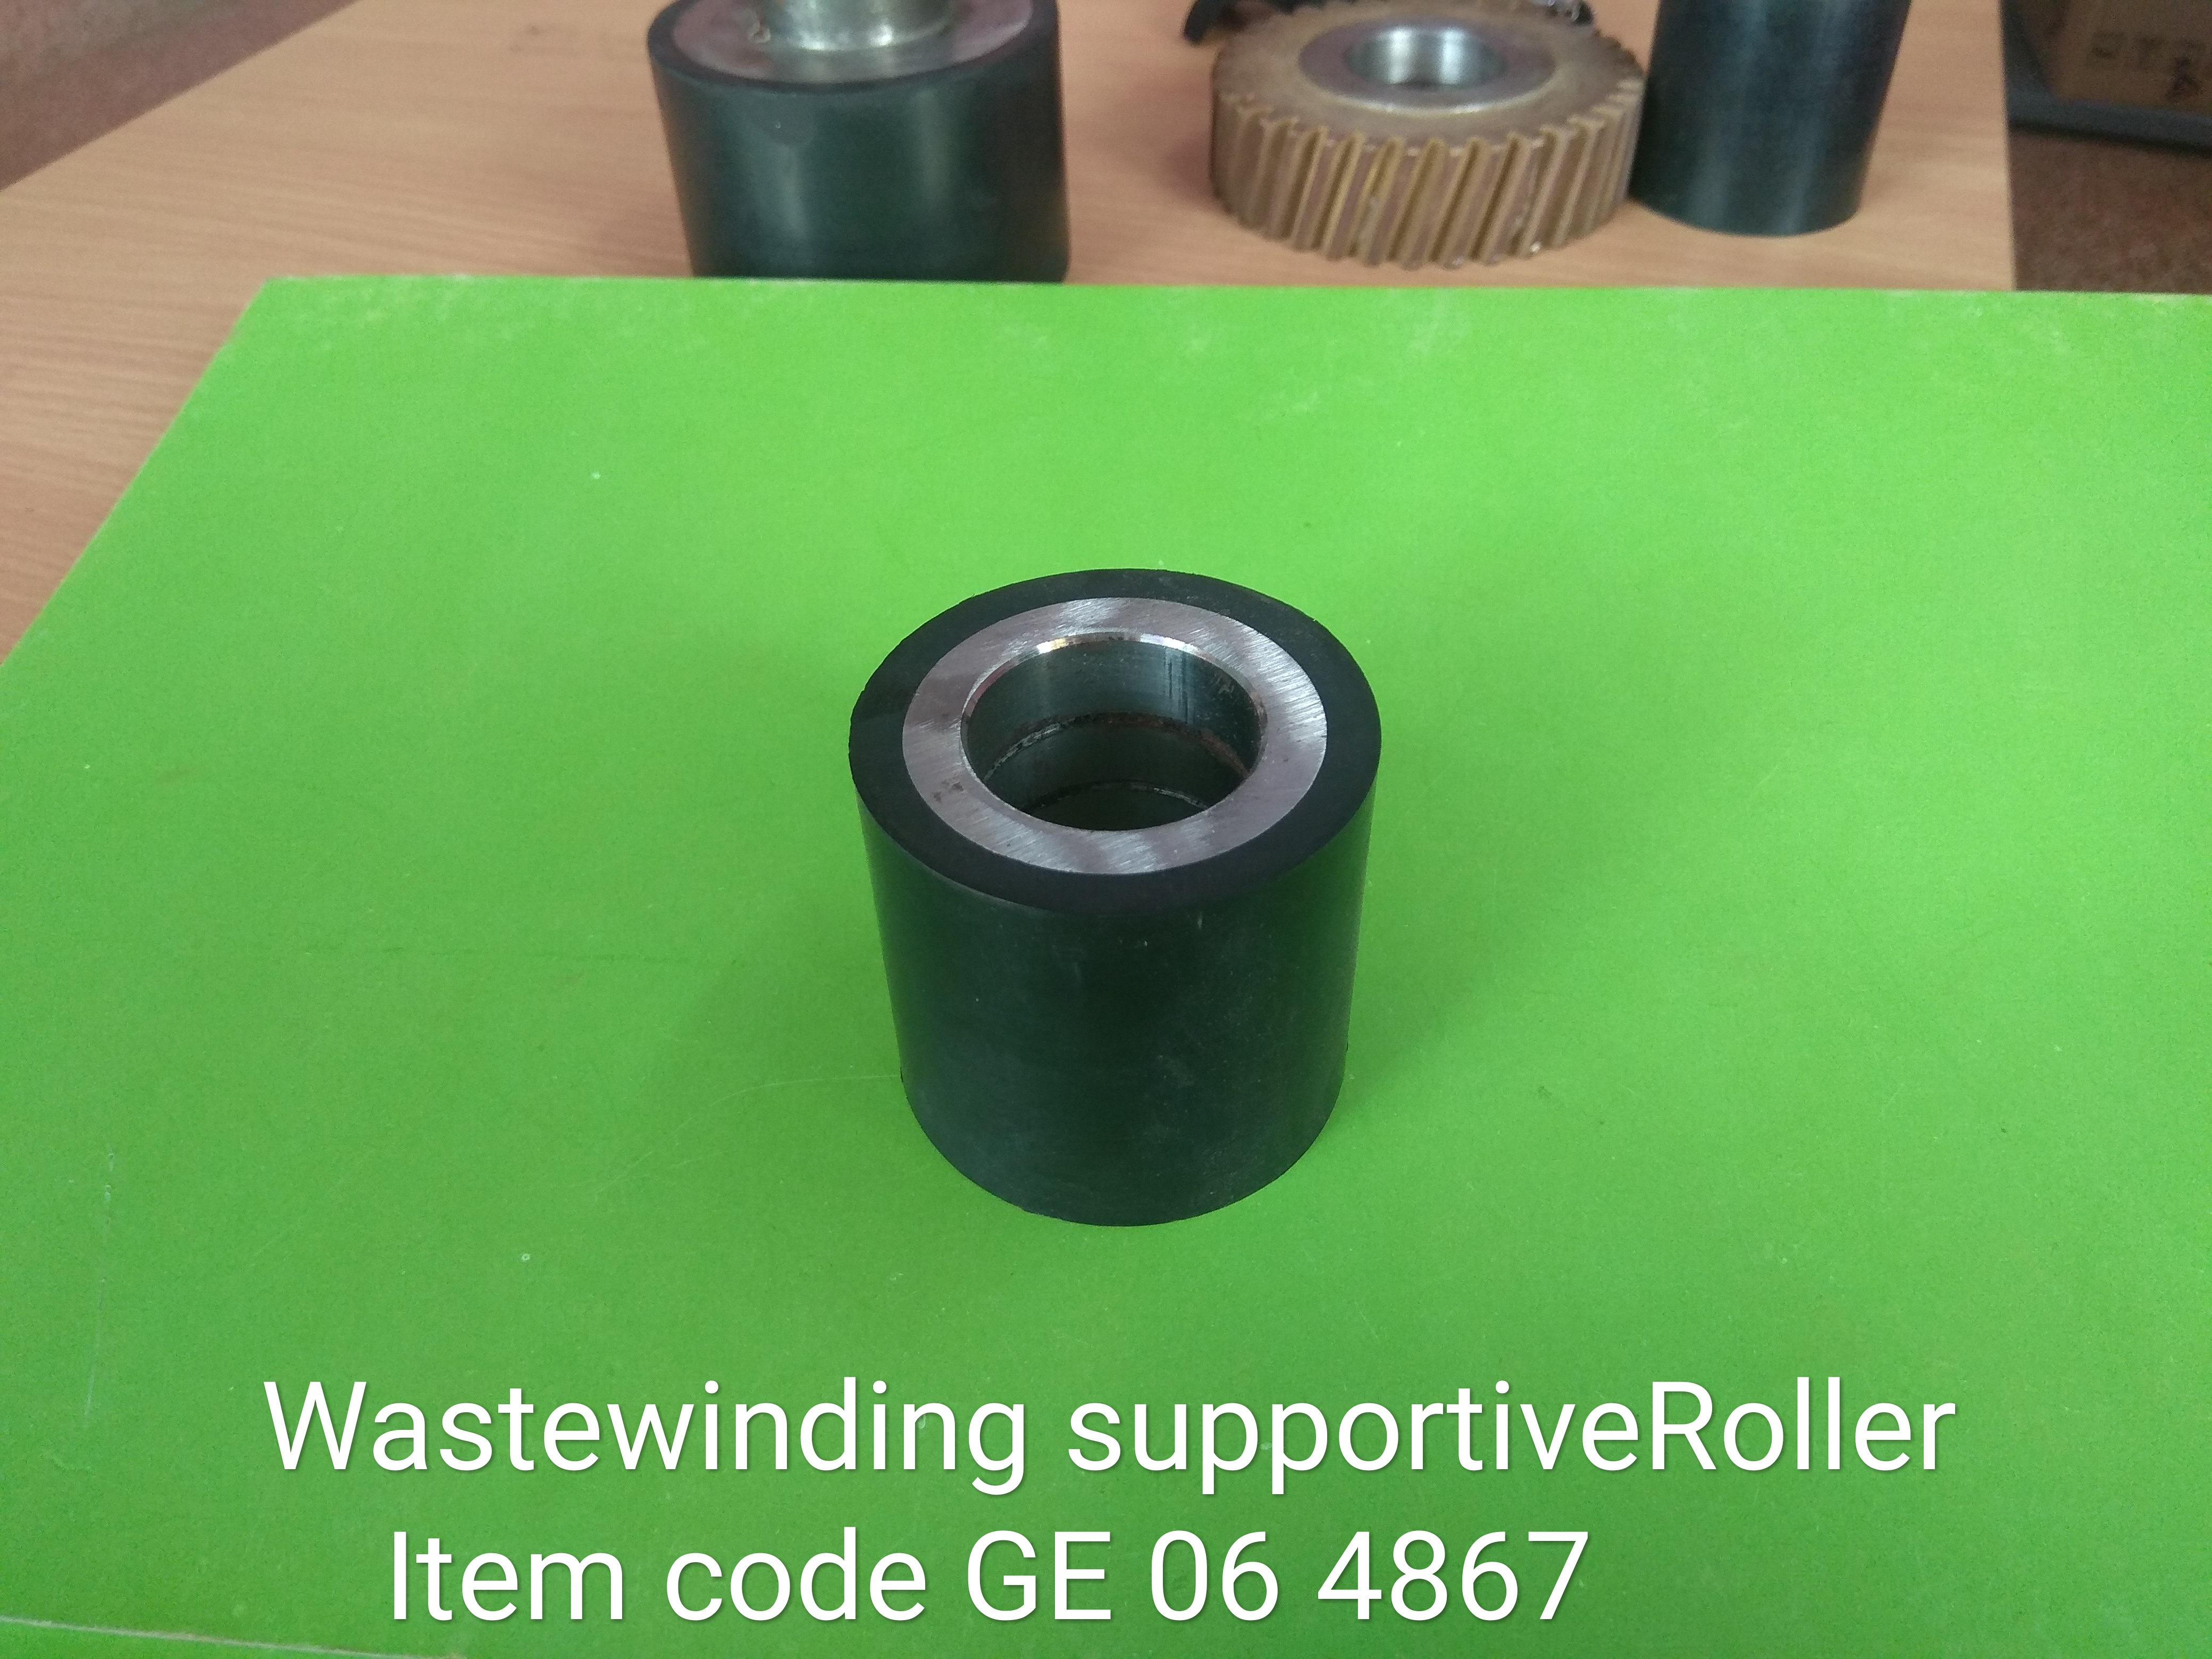 GE_04_483_WASTE_WINDING_SUPPORTIVE_ROLLER-TOYOTA_53_68.jpg